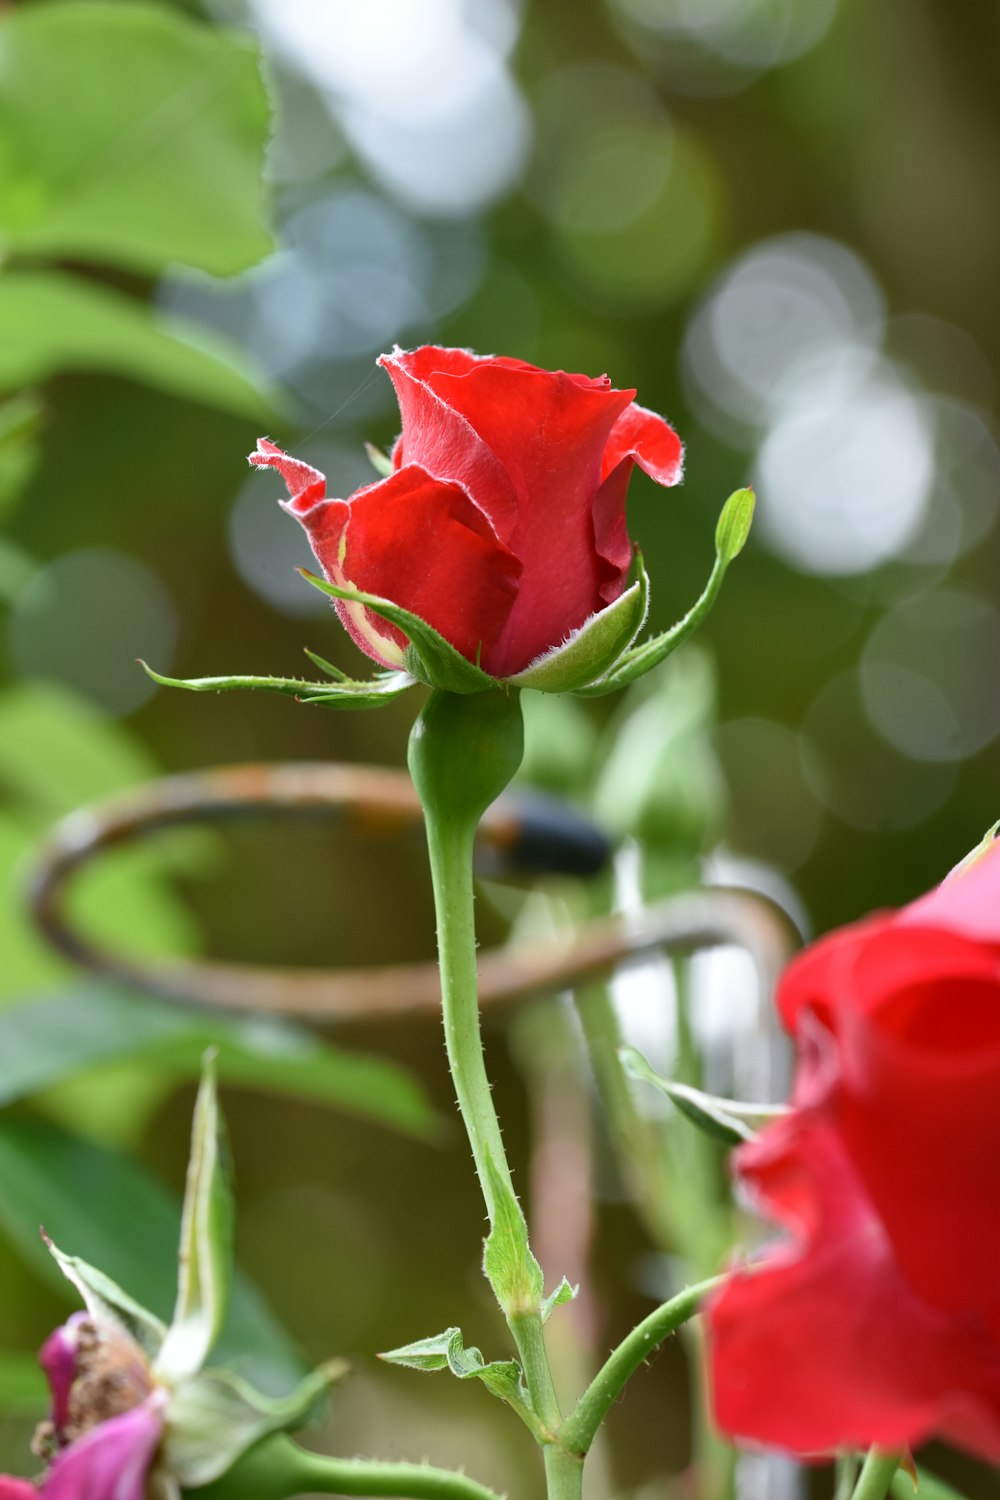 a close up of a single red rose